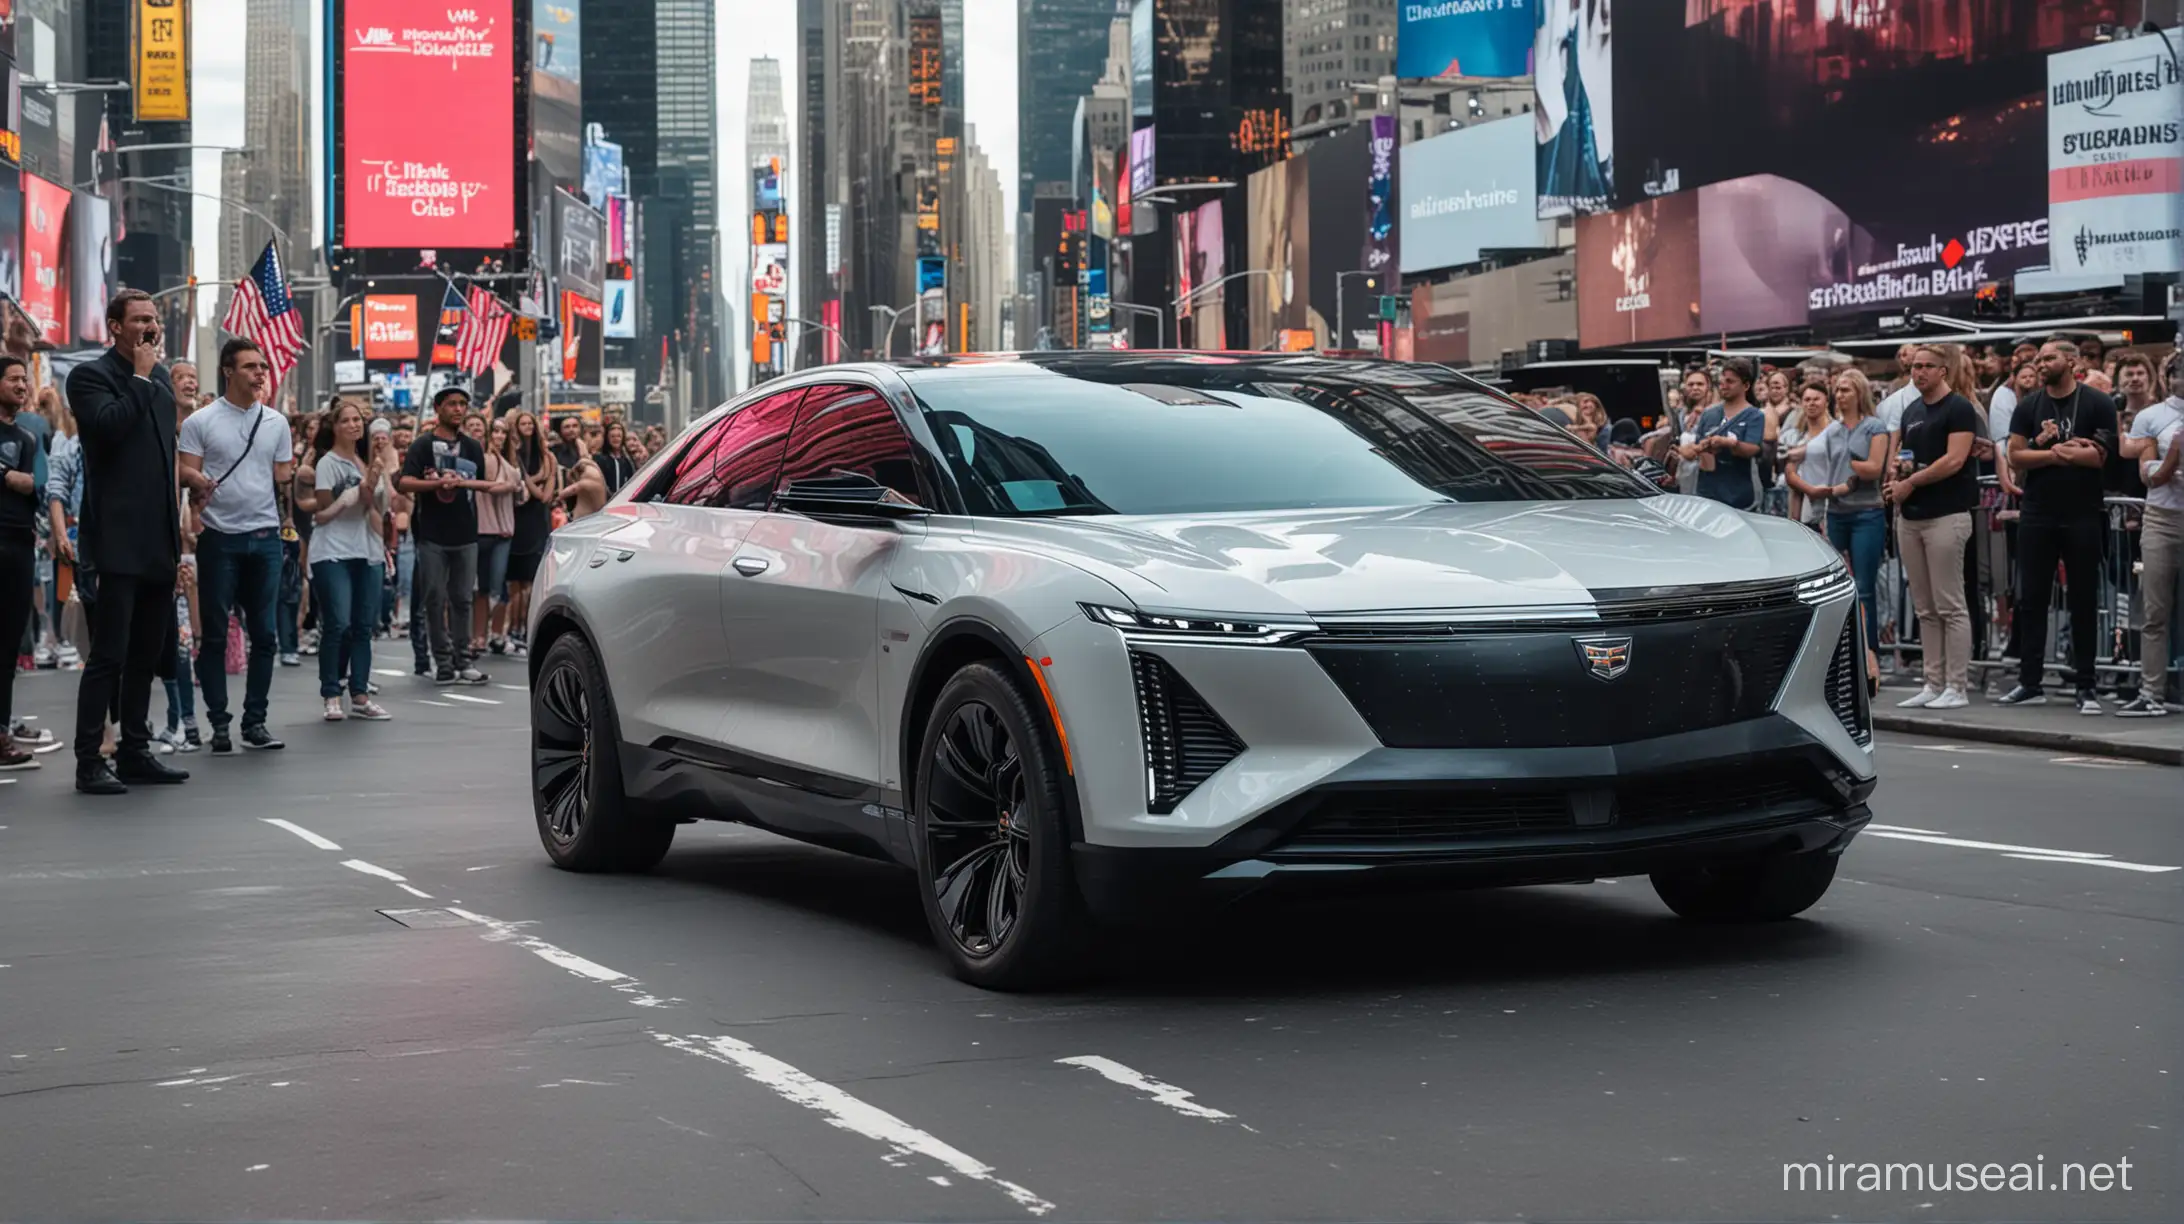 2024 Cadillac LYRIQ Electric Car Cruise in Bustling Times Square